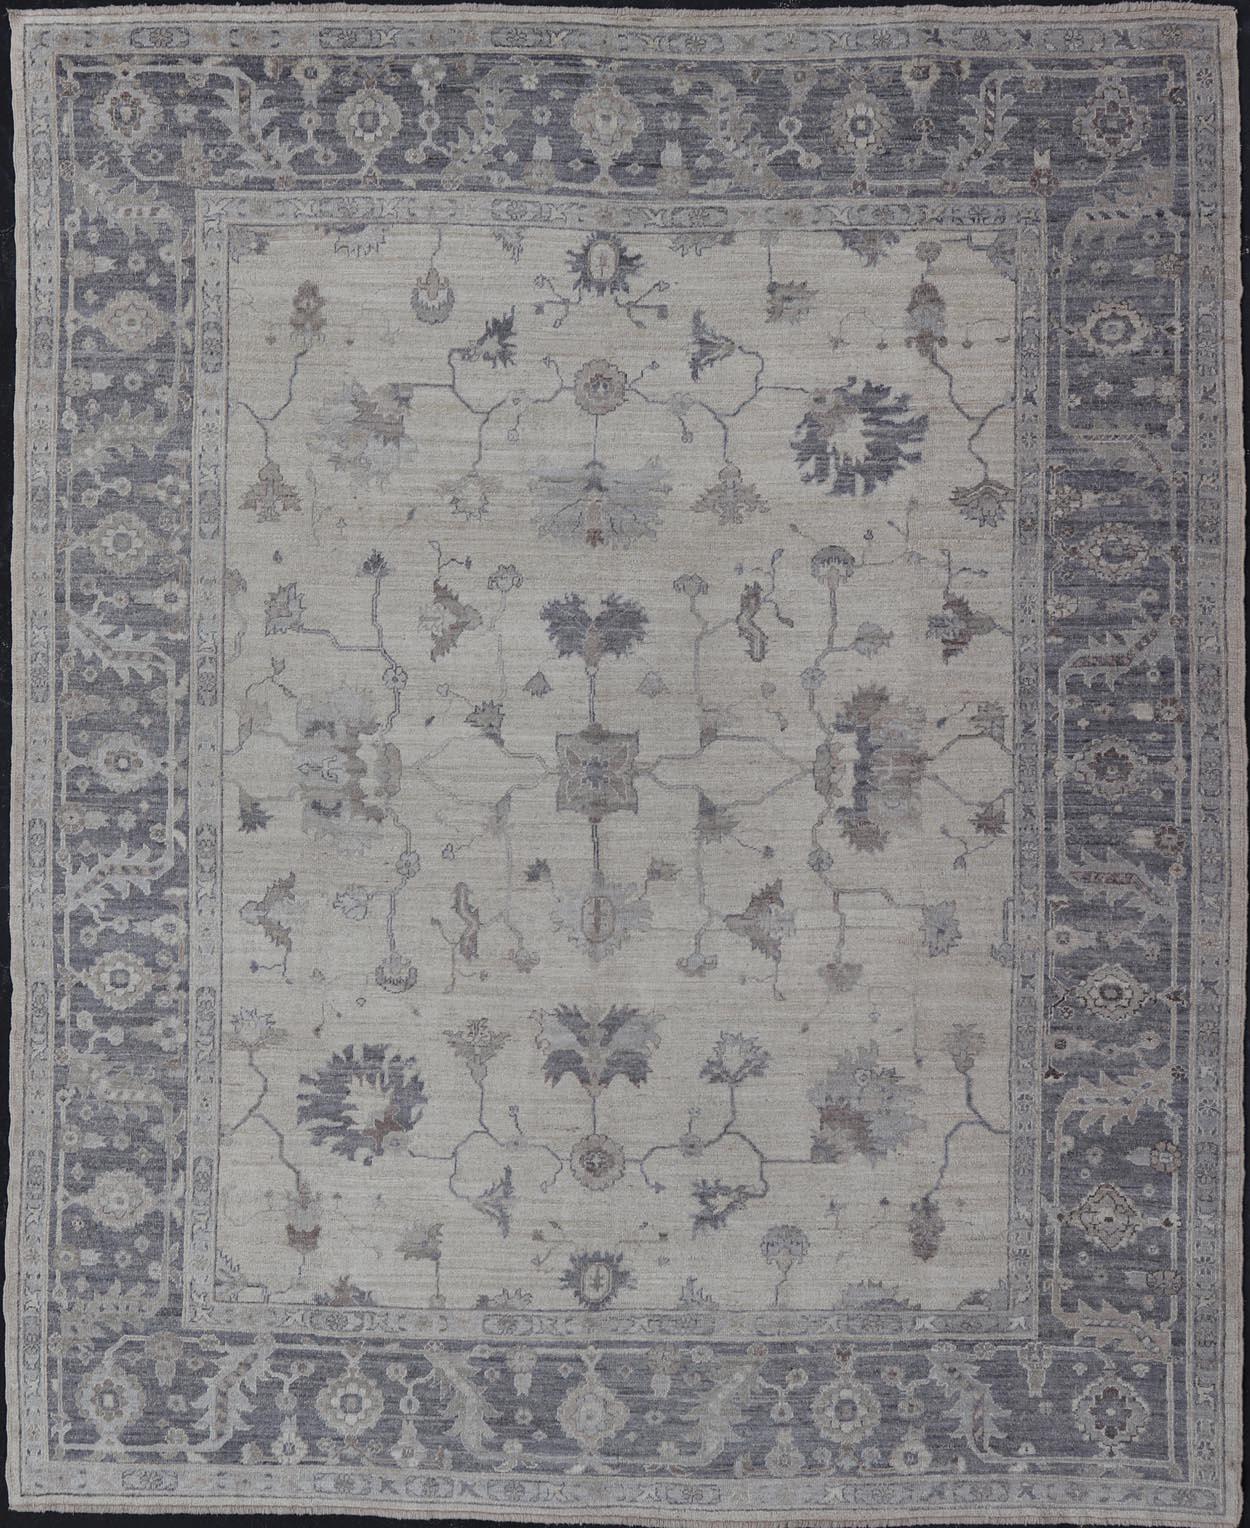 Angora All-Over Design Oushak Turkish Rug in Shades of Gray, Ivory, Silver